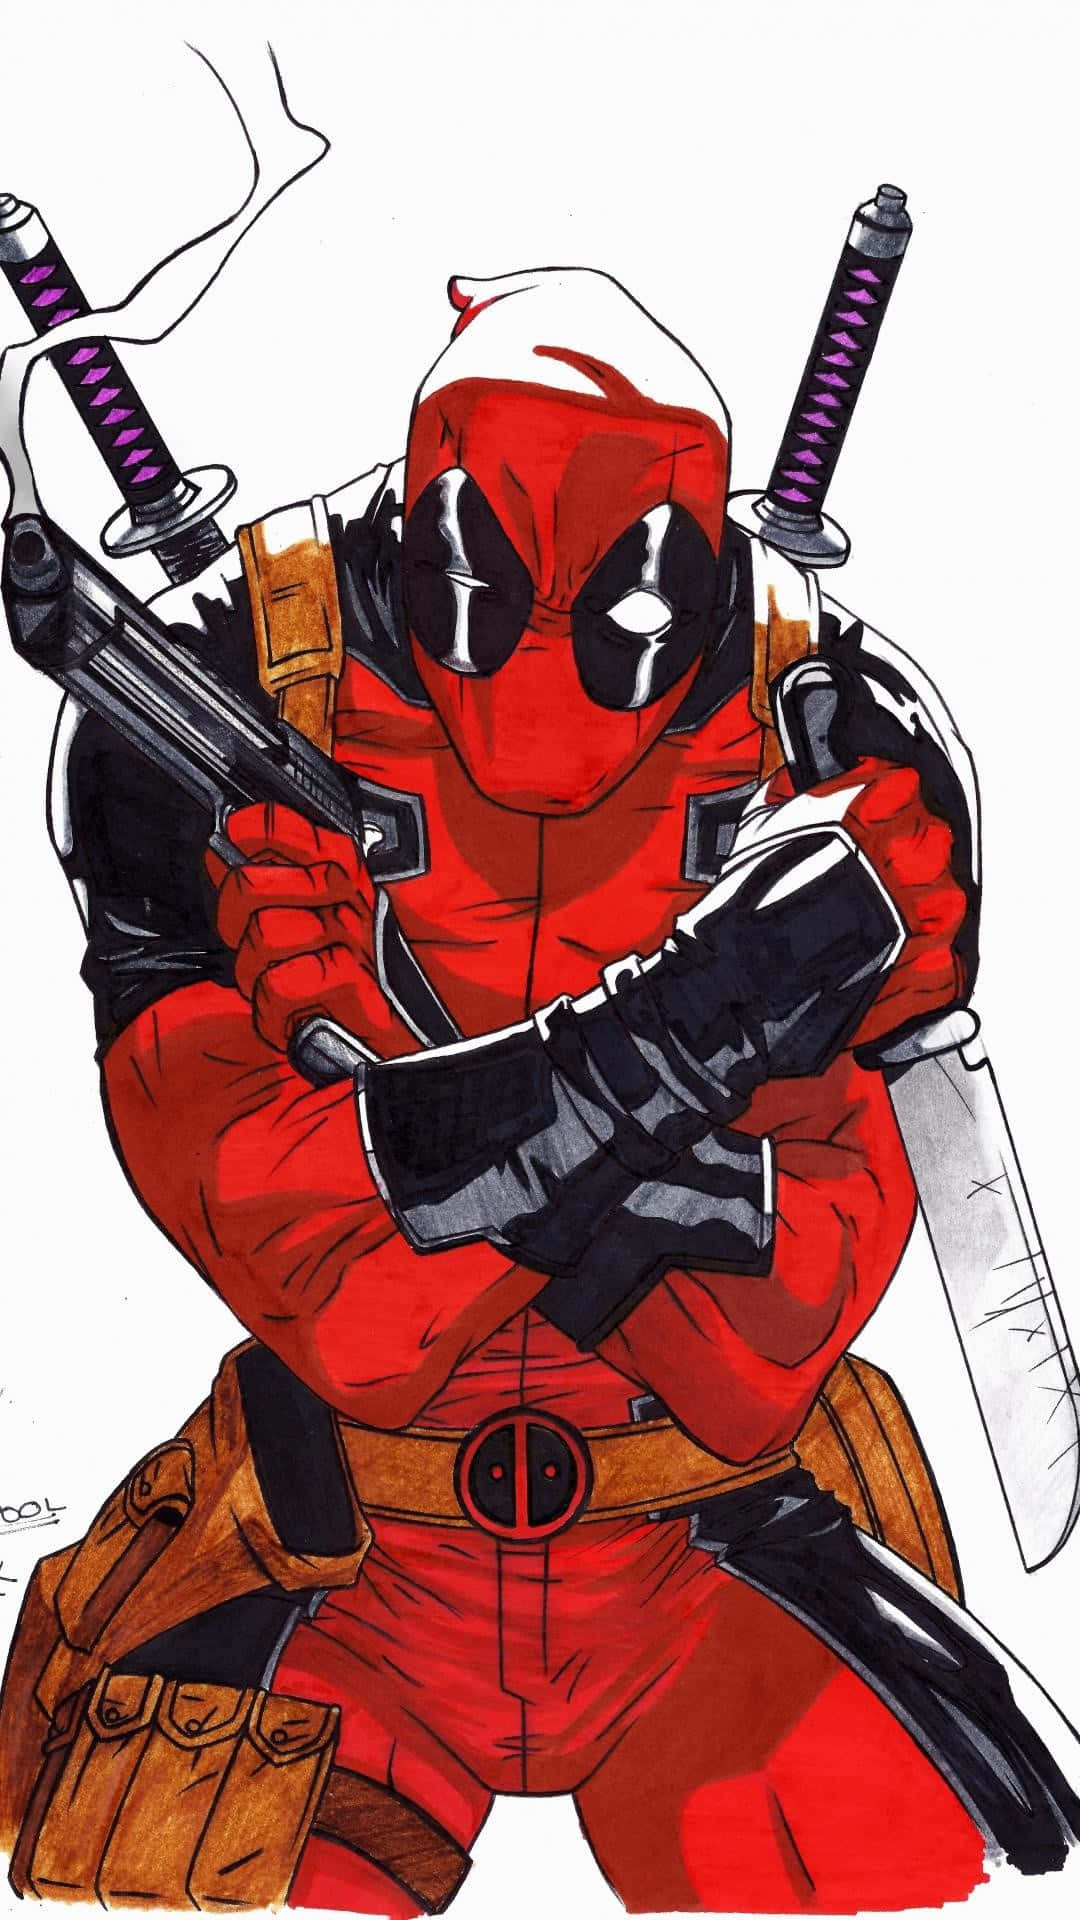 "Unlock the key to your inner Deadpool with the Deadpool iPhone!" Wallpaper